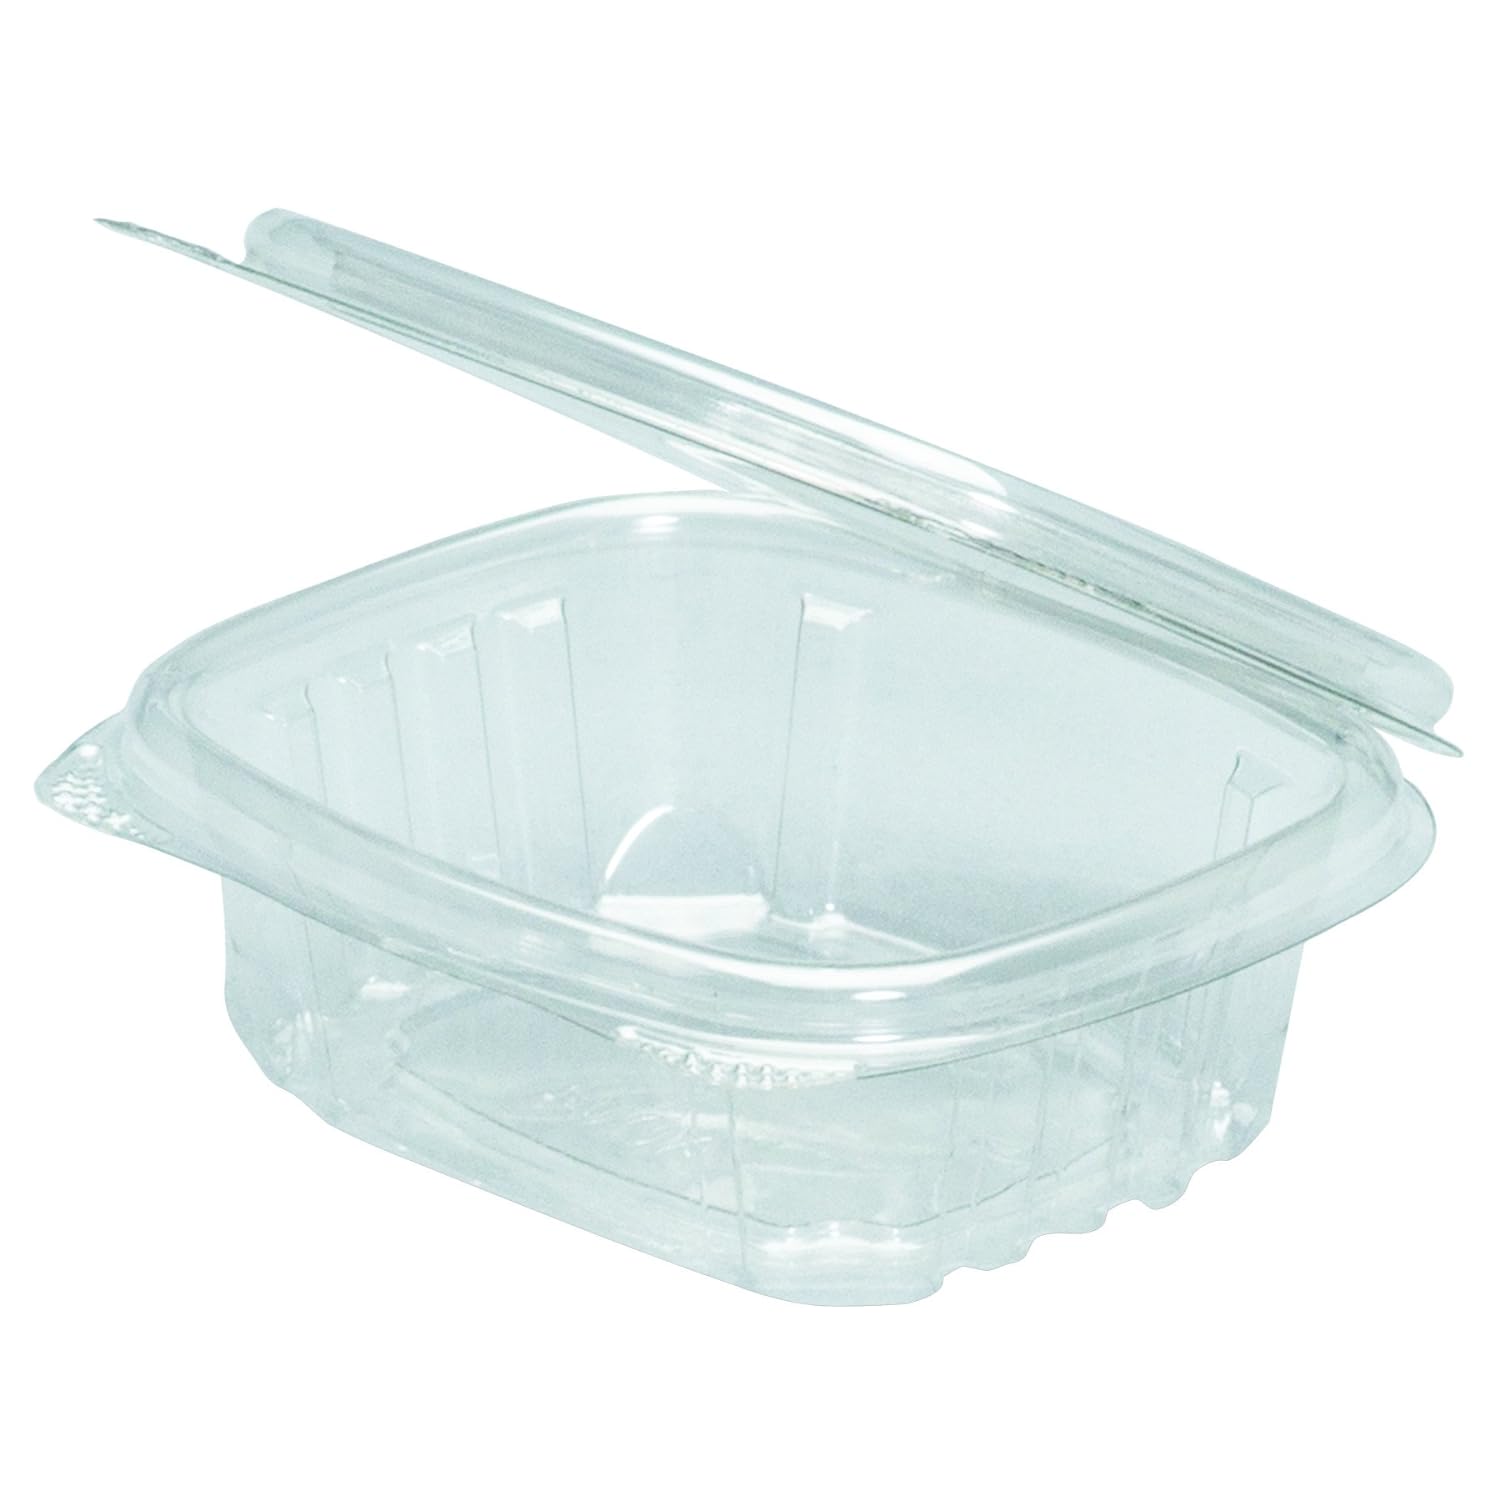 Generic Genpak AD24 Clear Hinged Deli Container, 24oz, 7 1/4 x 6 2/5 x 2 1/4, 100 per Bag (Case of 2 Bags)